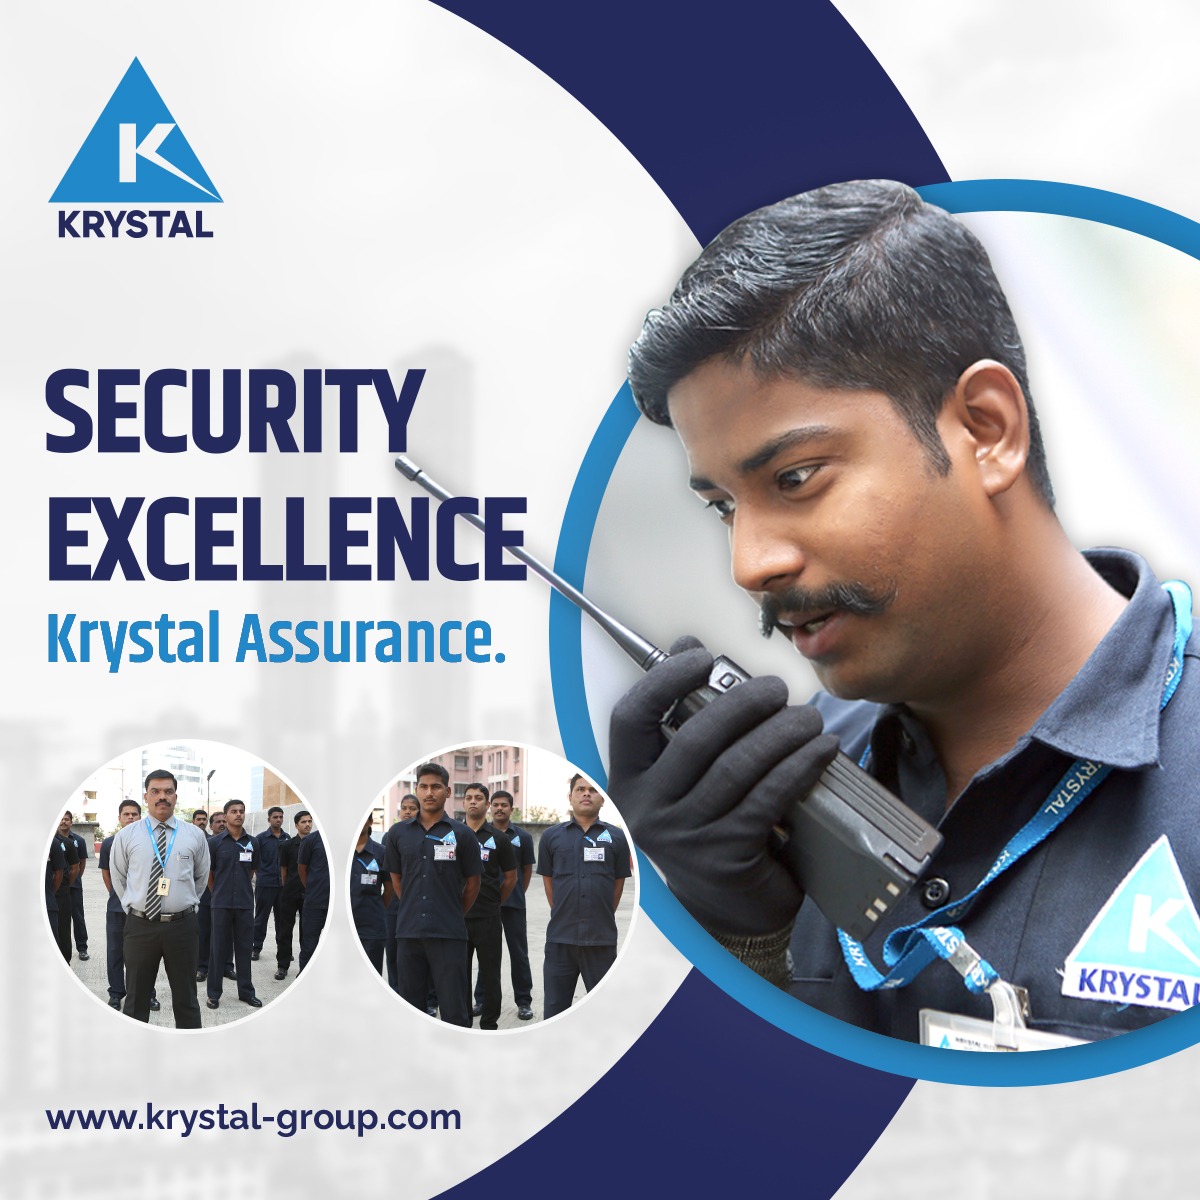 Setting the Standard for Security Excellence. Your Safety Is Our Commitment

#safety #security #securityservices #privatesecurity #securityguardservices #securitycompany #securityguard #securitycompany #security #privatesecurity #securityofficers #securitysystem